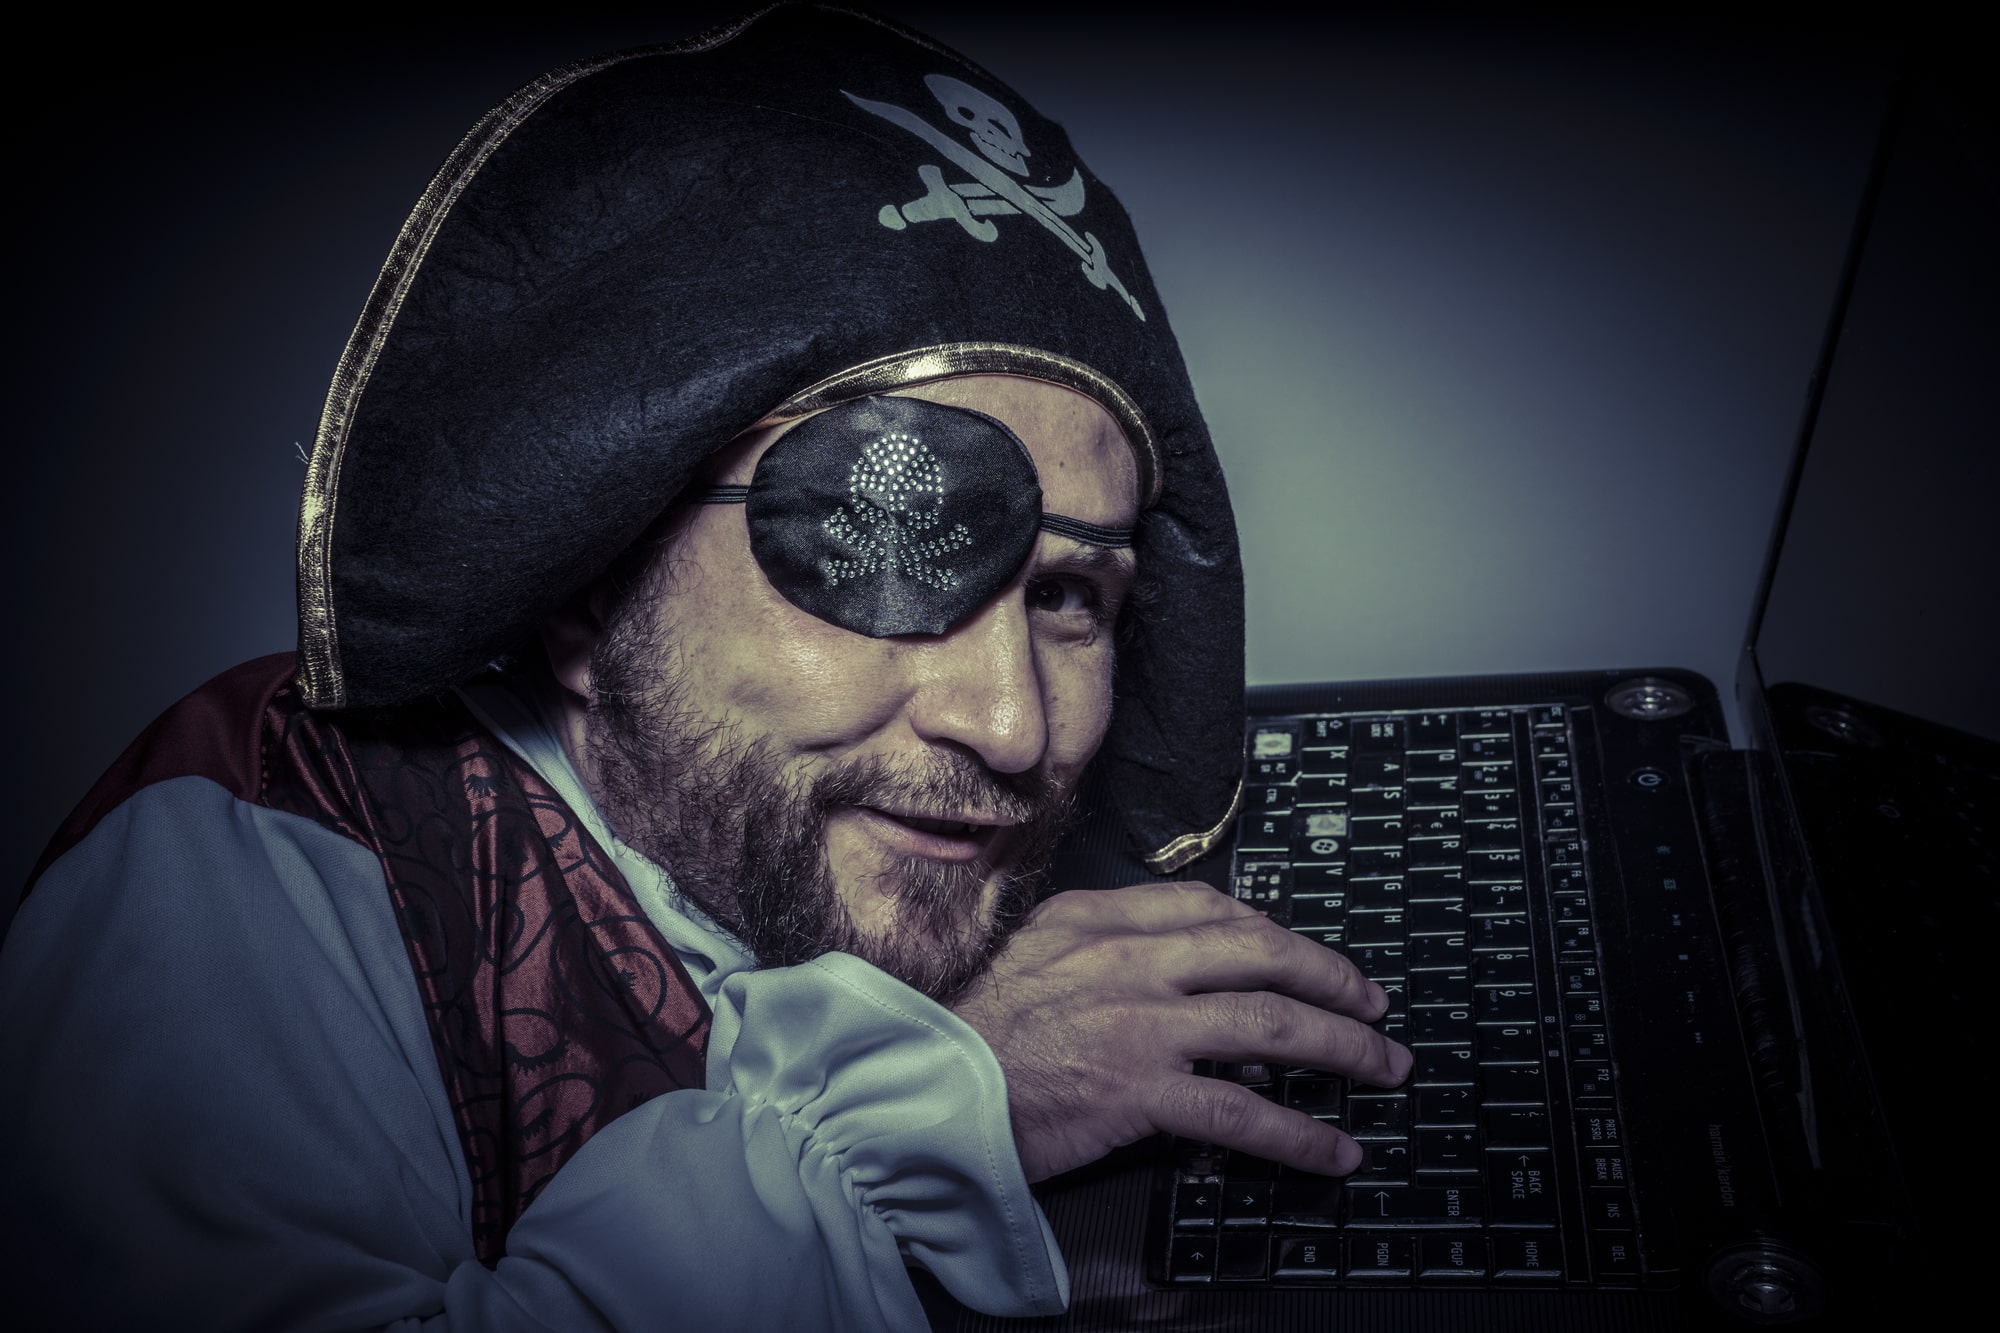 Microsoft wants to use Ethereum blockchain bounty system to catch pirates